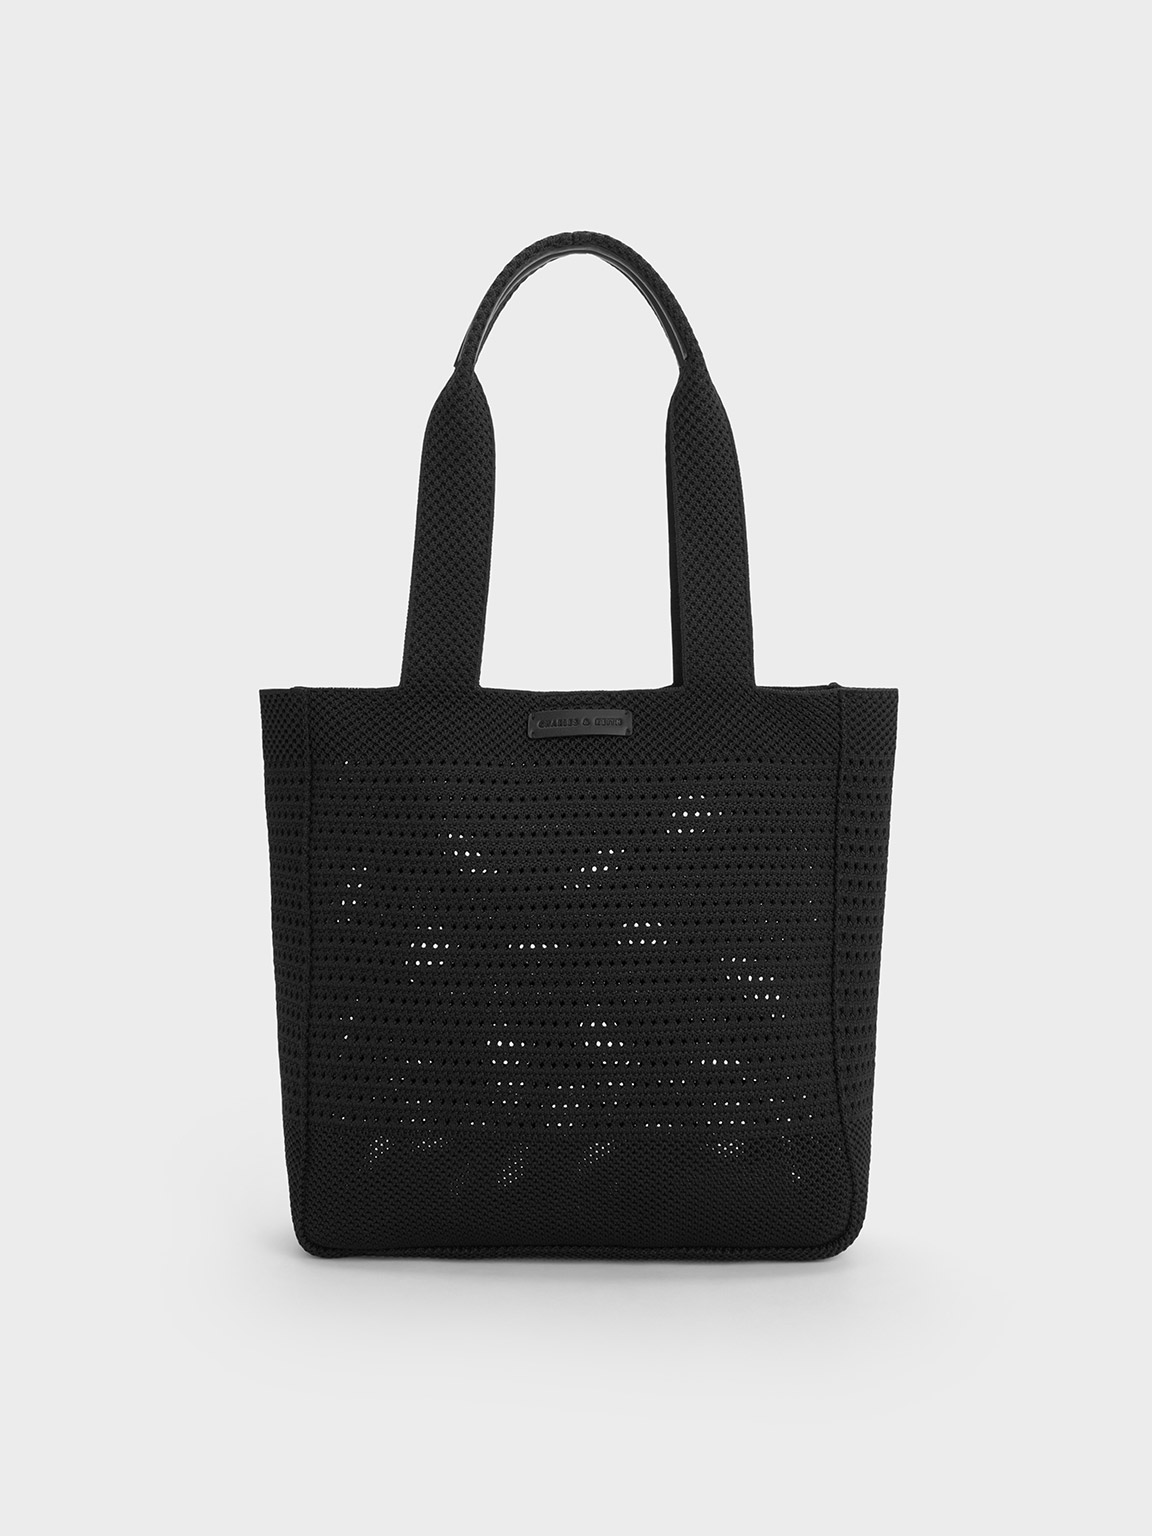 The KYDRA Nylon Tote Bag is easy to sling, cross or hand-carry, making it  completely fuss-free and perfect for travelling, gym, errand runs, a  beachy